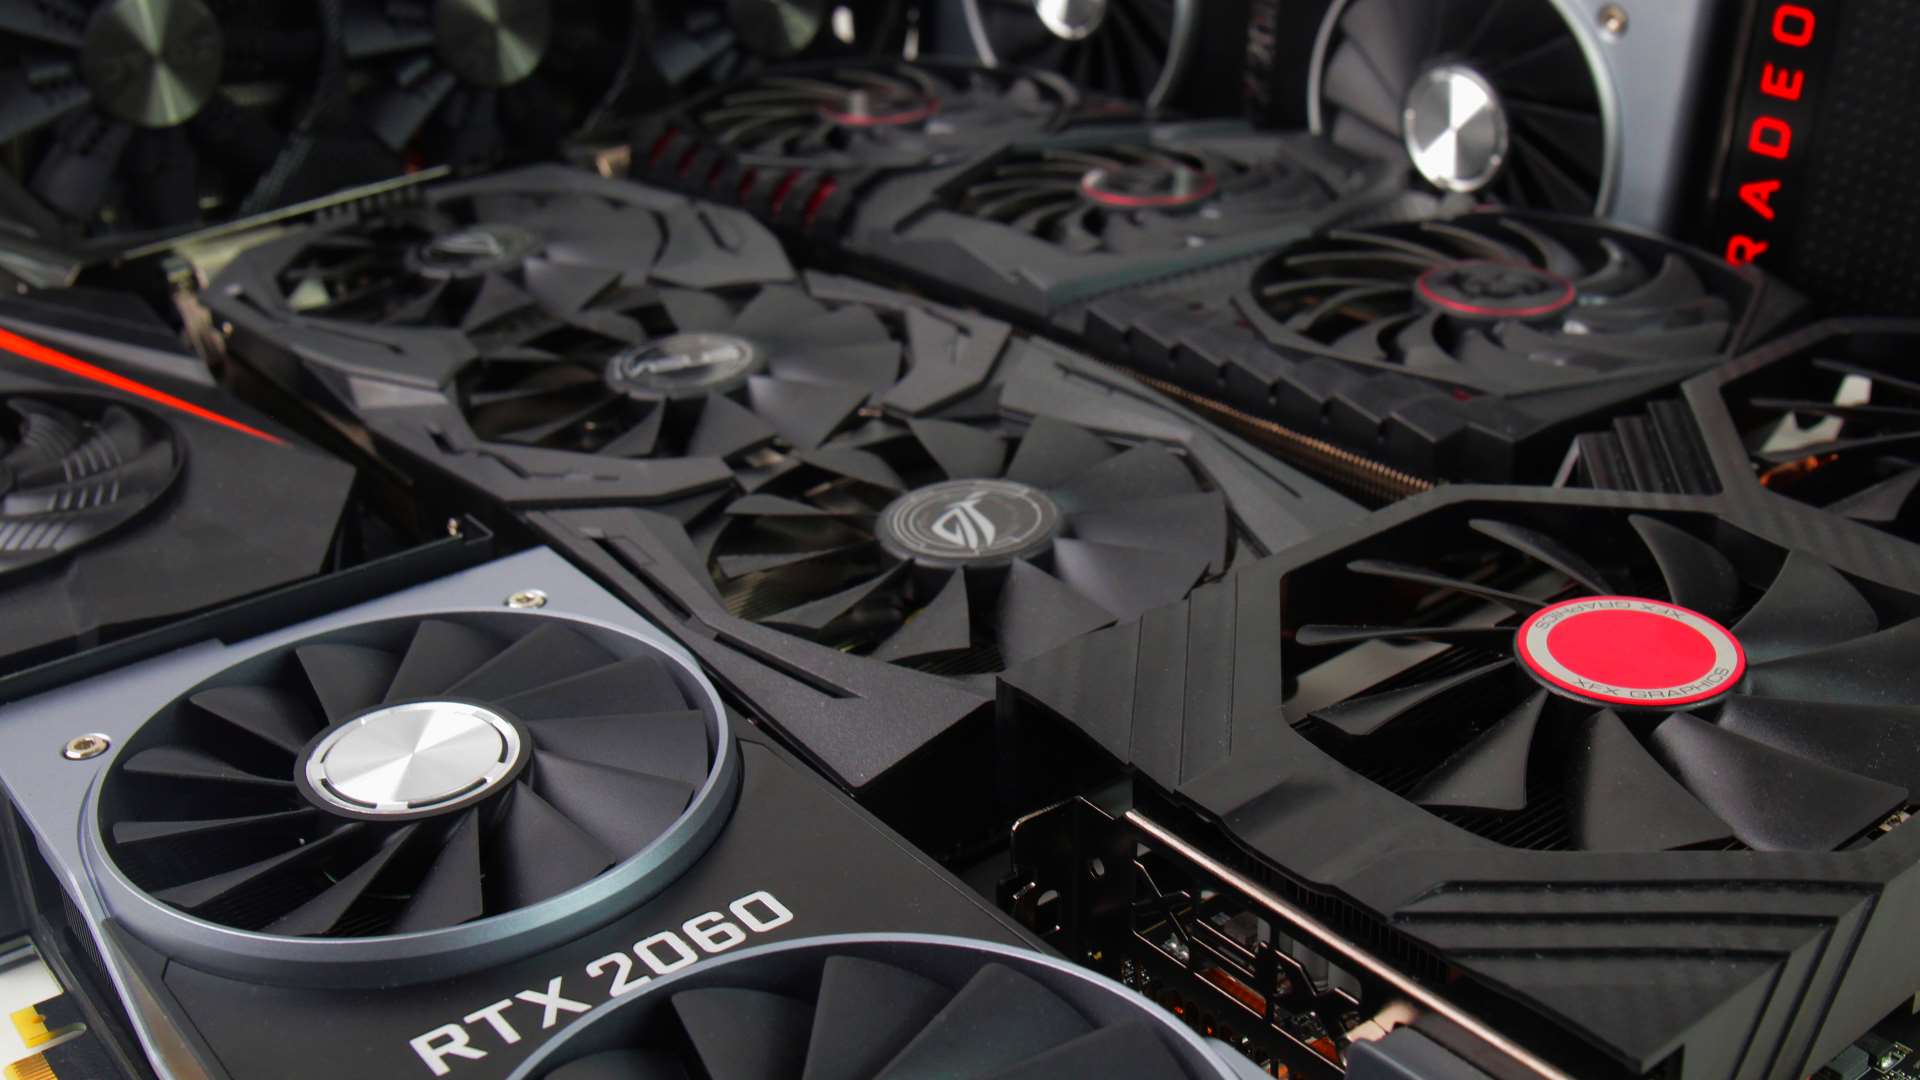 Best graphics card – what is the top graphics card for gaming in 2021?